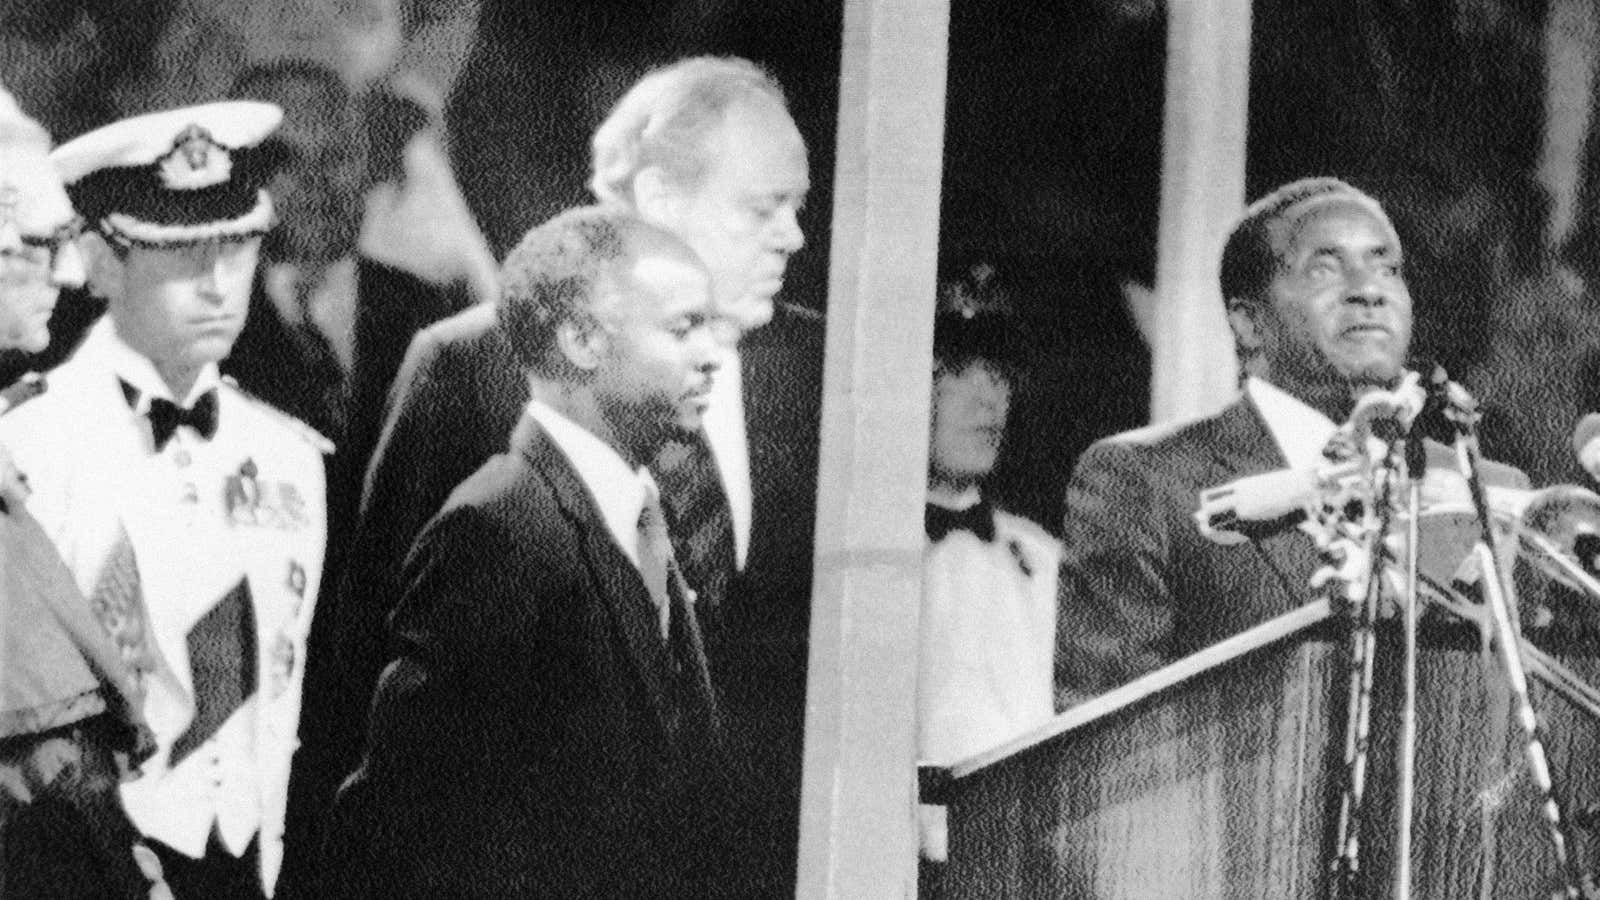 During the Independence celebrations, on April 18, 1980, prime minister Robert Mugabe takes the oath of allegiance to Zimbabwe